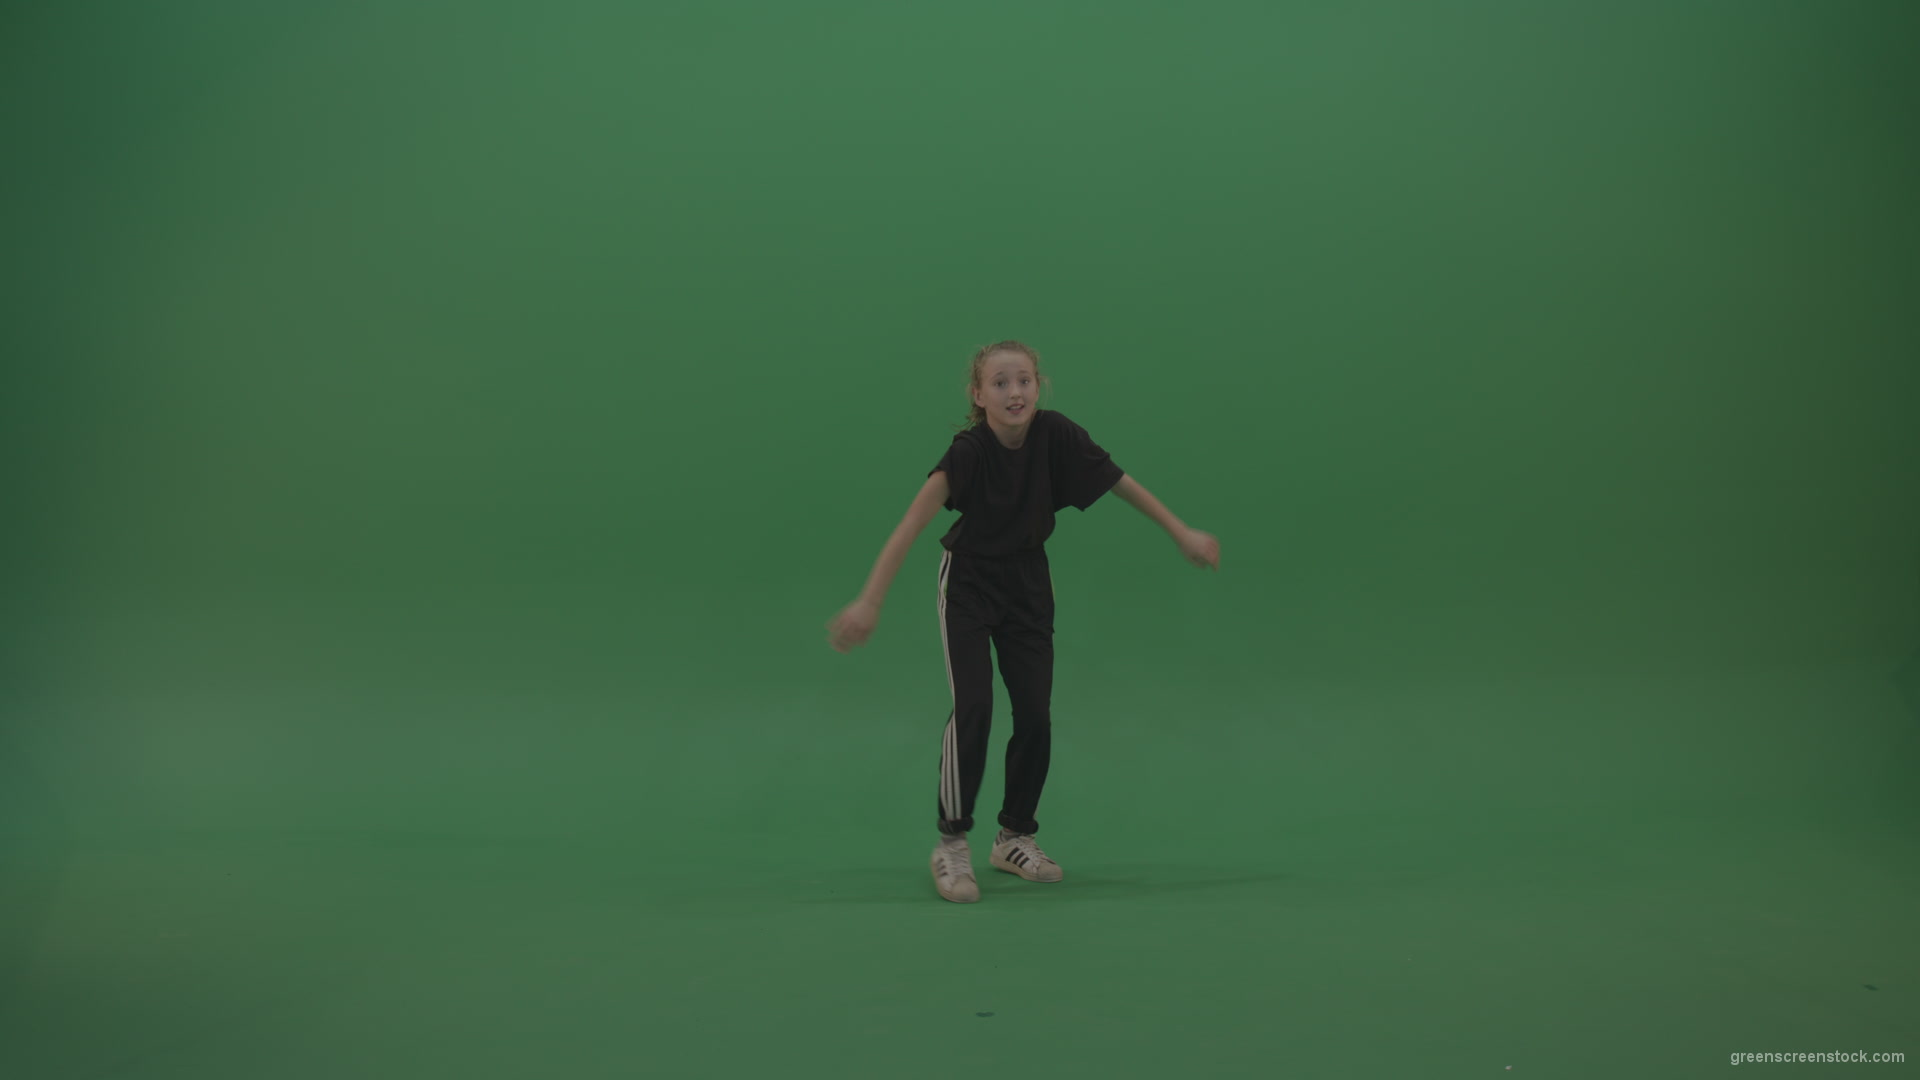 Incredible_Dance_Hip_Hop_Moves_From_Young_SmalKid_Female_Wearing_Black_Sweat_Suite_And_White_Trainers_On_Green_Screen_Wall_Background_006 Green Screen Stock